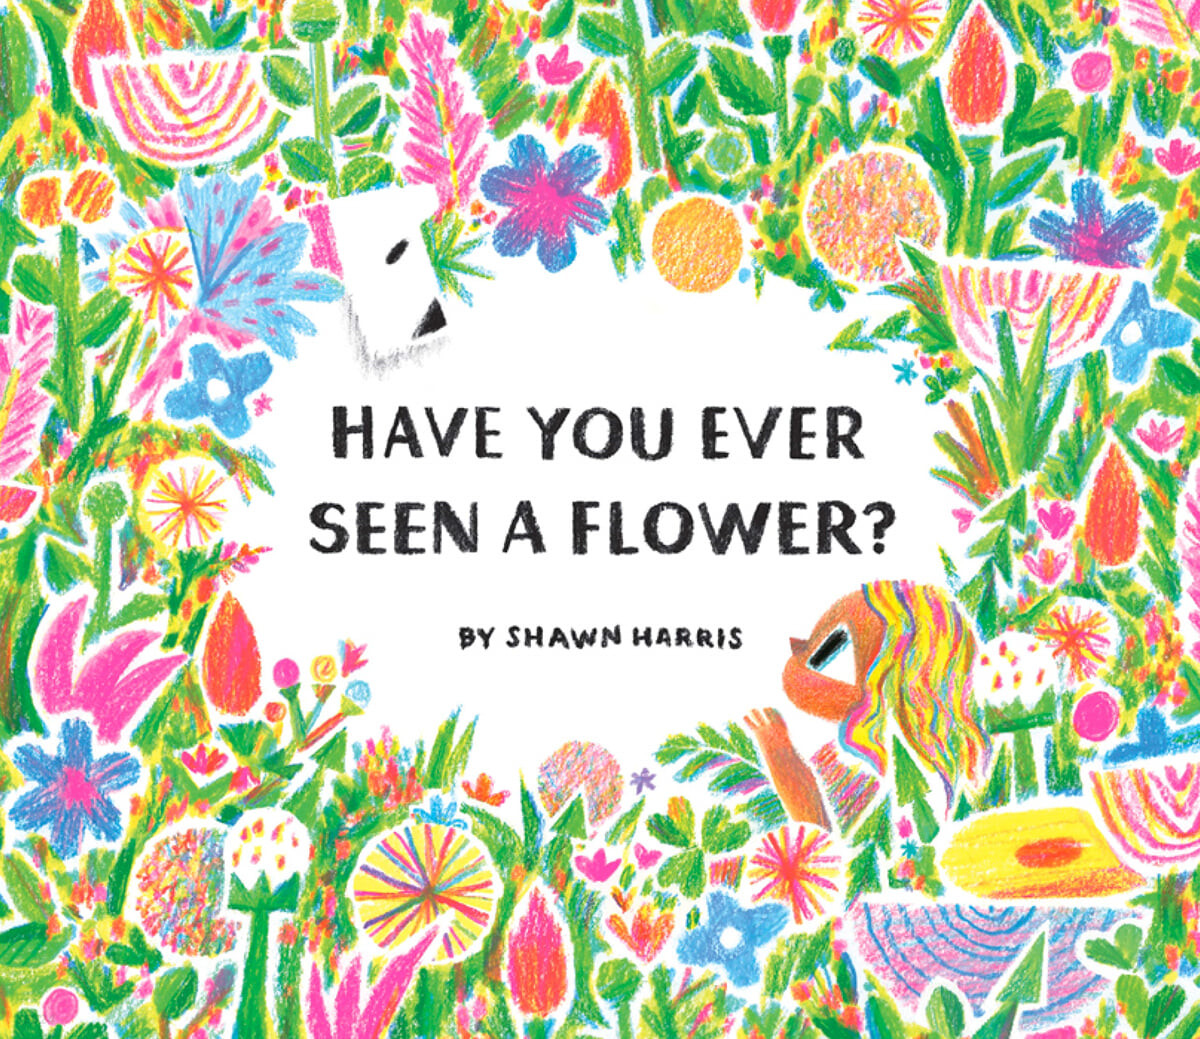 Have you ever seen a flower?